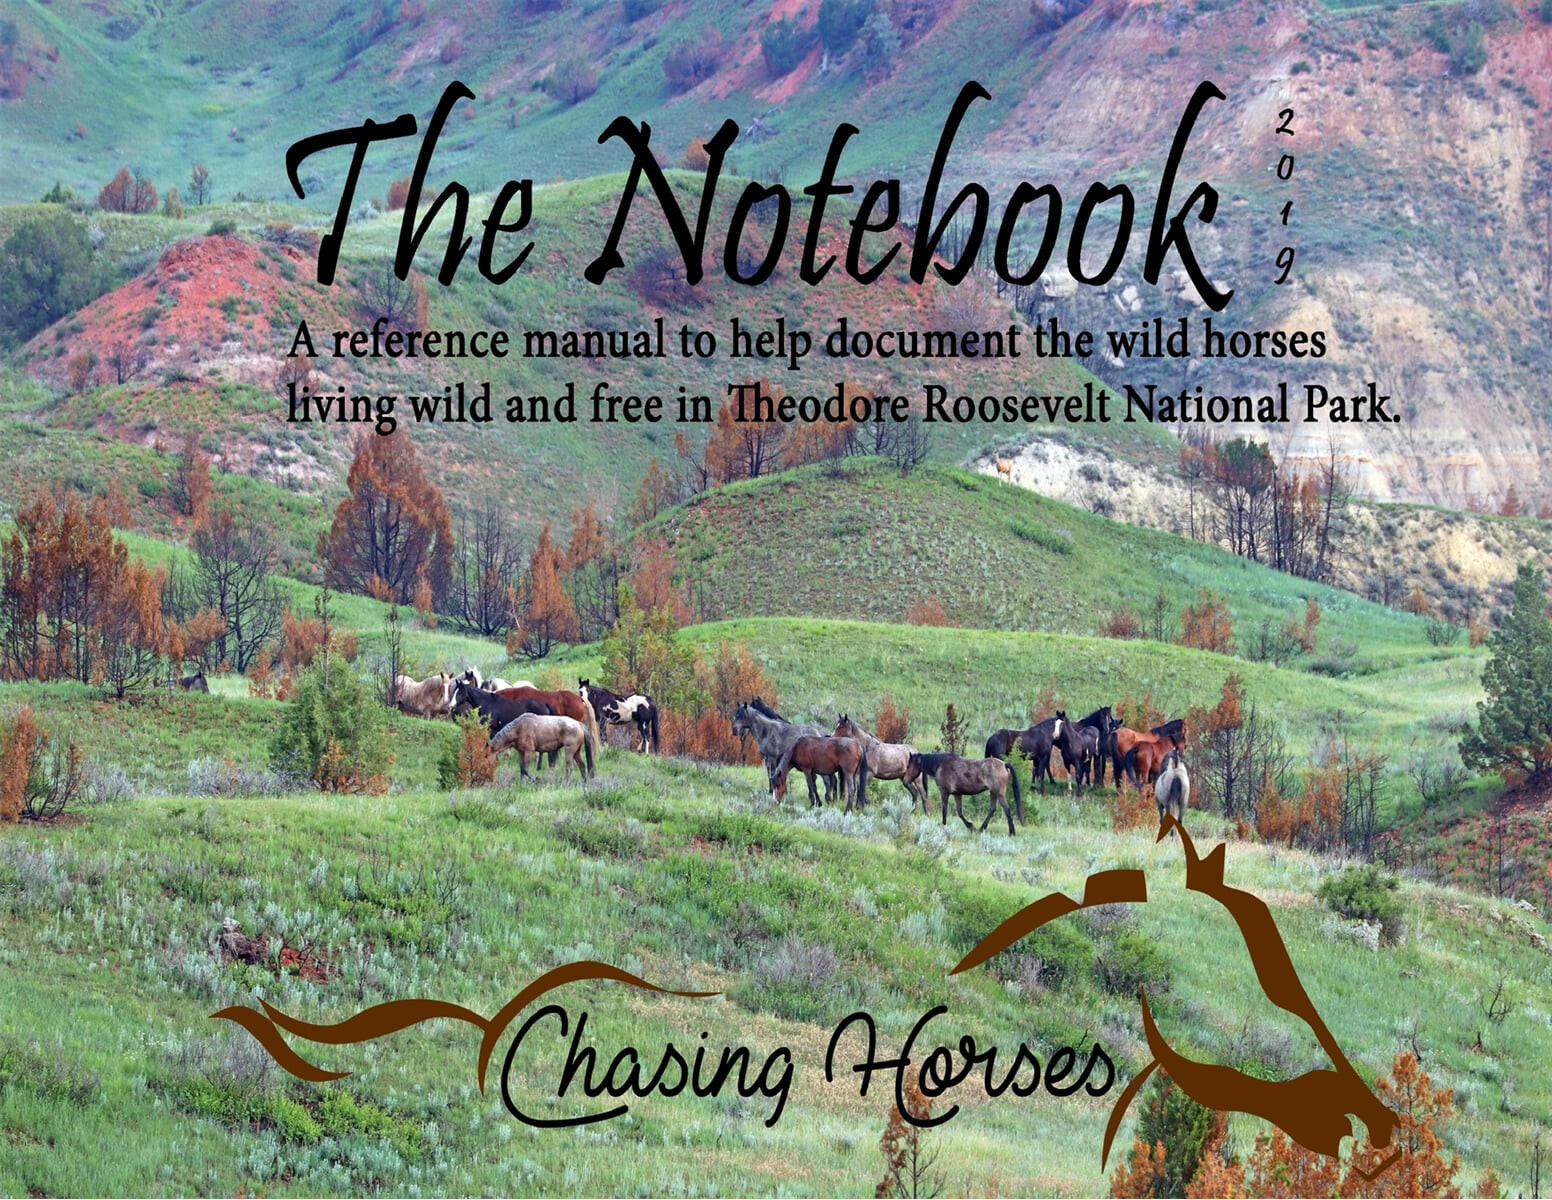 The Notebook (A reference manual to help document the wild horses living wild and free in Theodore Roosevelt National Park.)